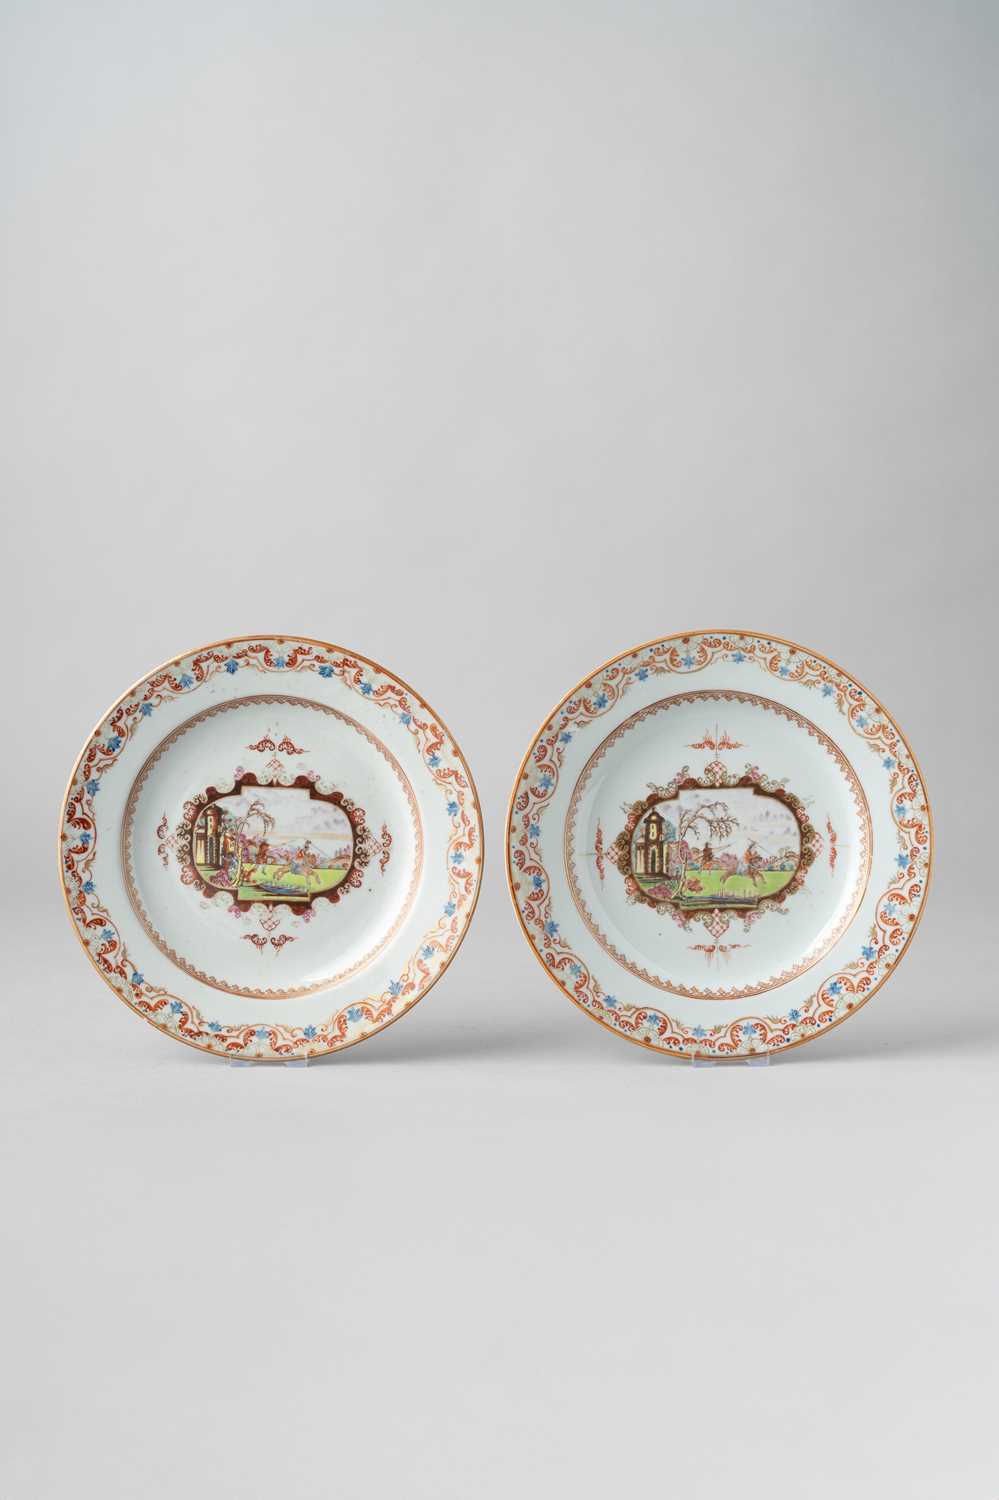 NO RESERVE A PAIR OF CHINESE FAMILLE ROSE MEISSEN-STYLE PLATES MID 18TH CENTURY Decorated with